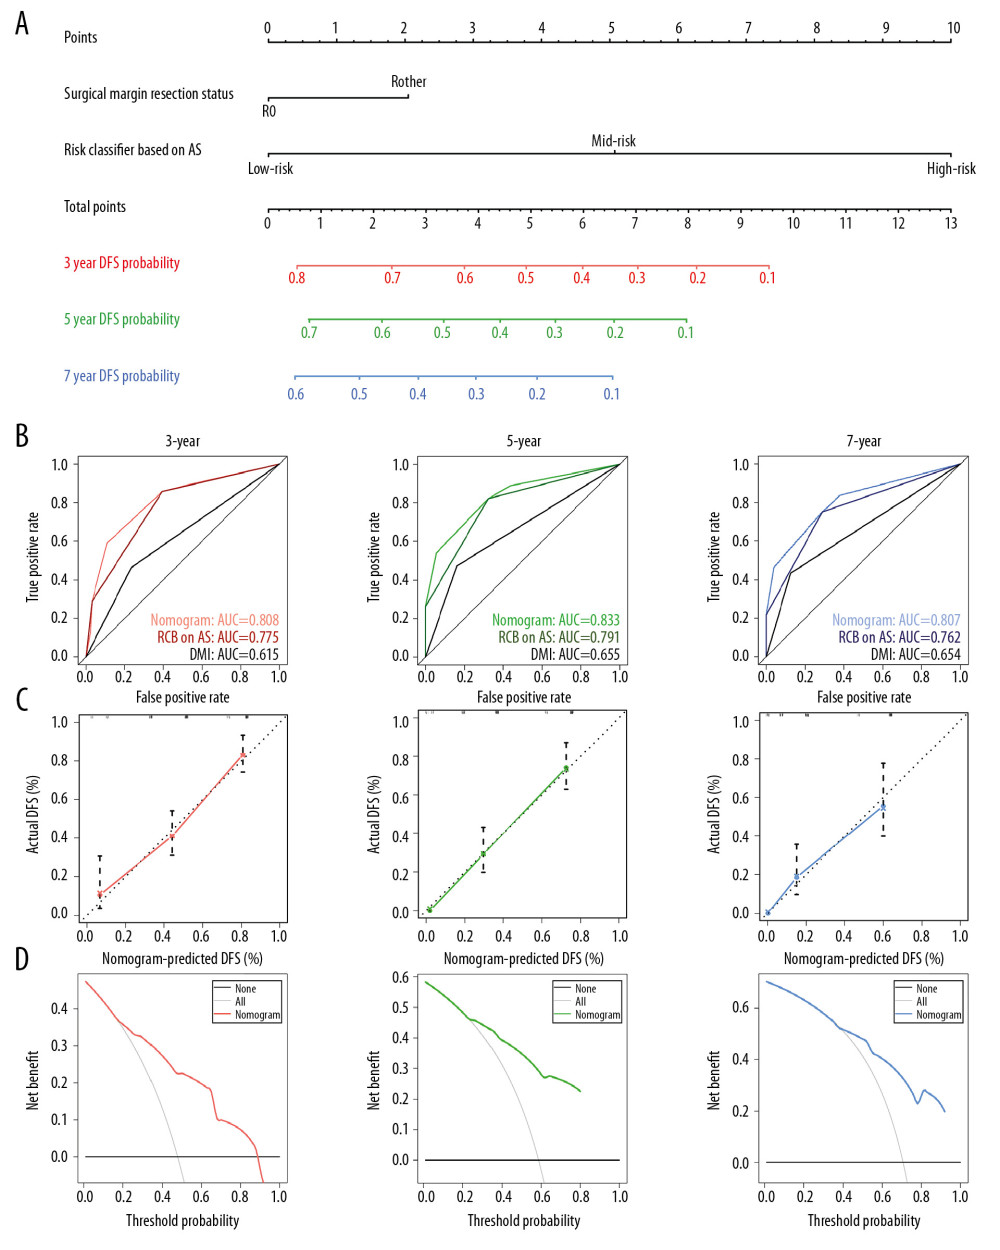 The nomograms and corresponding results showed the prognostic value of AS events and clinicopathologic data. (A) Nomogram for predicting DFS in the SARC cohort. (B) Time-dependent ROC curves for 3- (red), 5- (green), and 7- (blue) year DFS. (C) Calibration plot of the AS-clinicopathologic nomogram in terms of the agreement between nomogram-predicted and observed 3- (red), 5- (green), and 7- (blue) year DFS in the SARC cohort. (D) Decision curve analysis of the AS-clinicopathologic nomogram for 3- (red), 5- (green), and 7- (blue) year risk in the SARC cohort. AS – alternative splicing; DFS – disease-free survival; SARC – sarcoma; ROC – receiver operating characteristic.